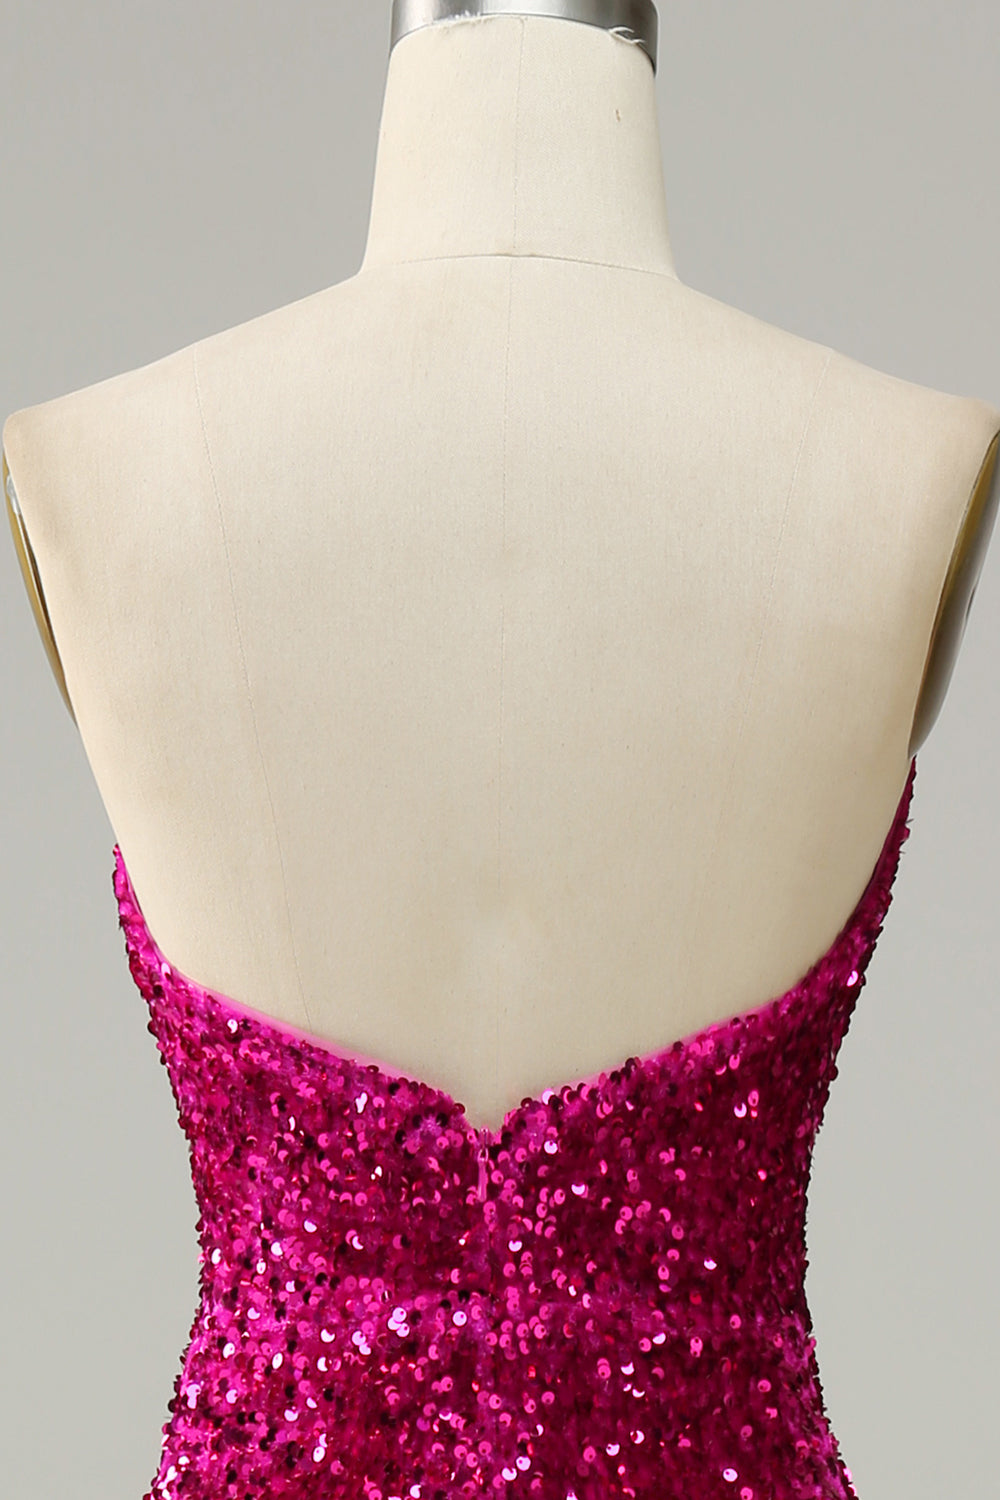 Hot Pink Strapless Sequin Prom Dress with Slit